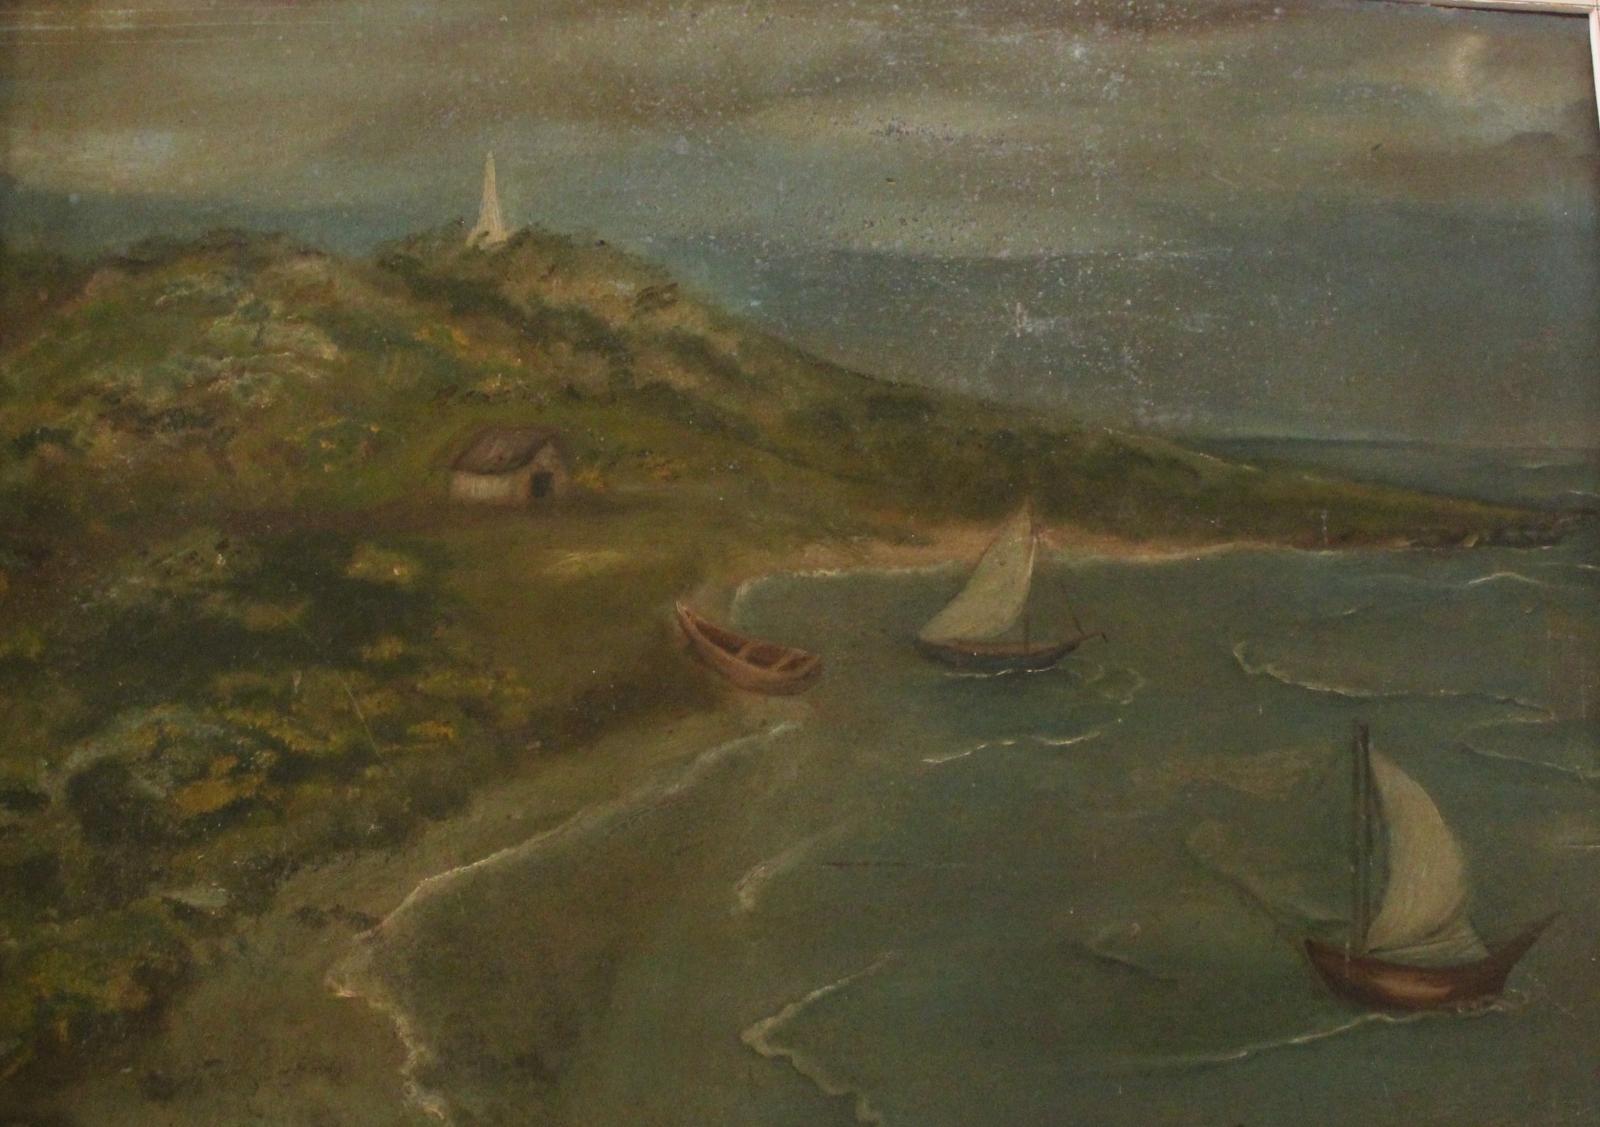 Two sail boats near shore, right, obelisk on hill in centre.